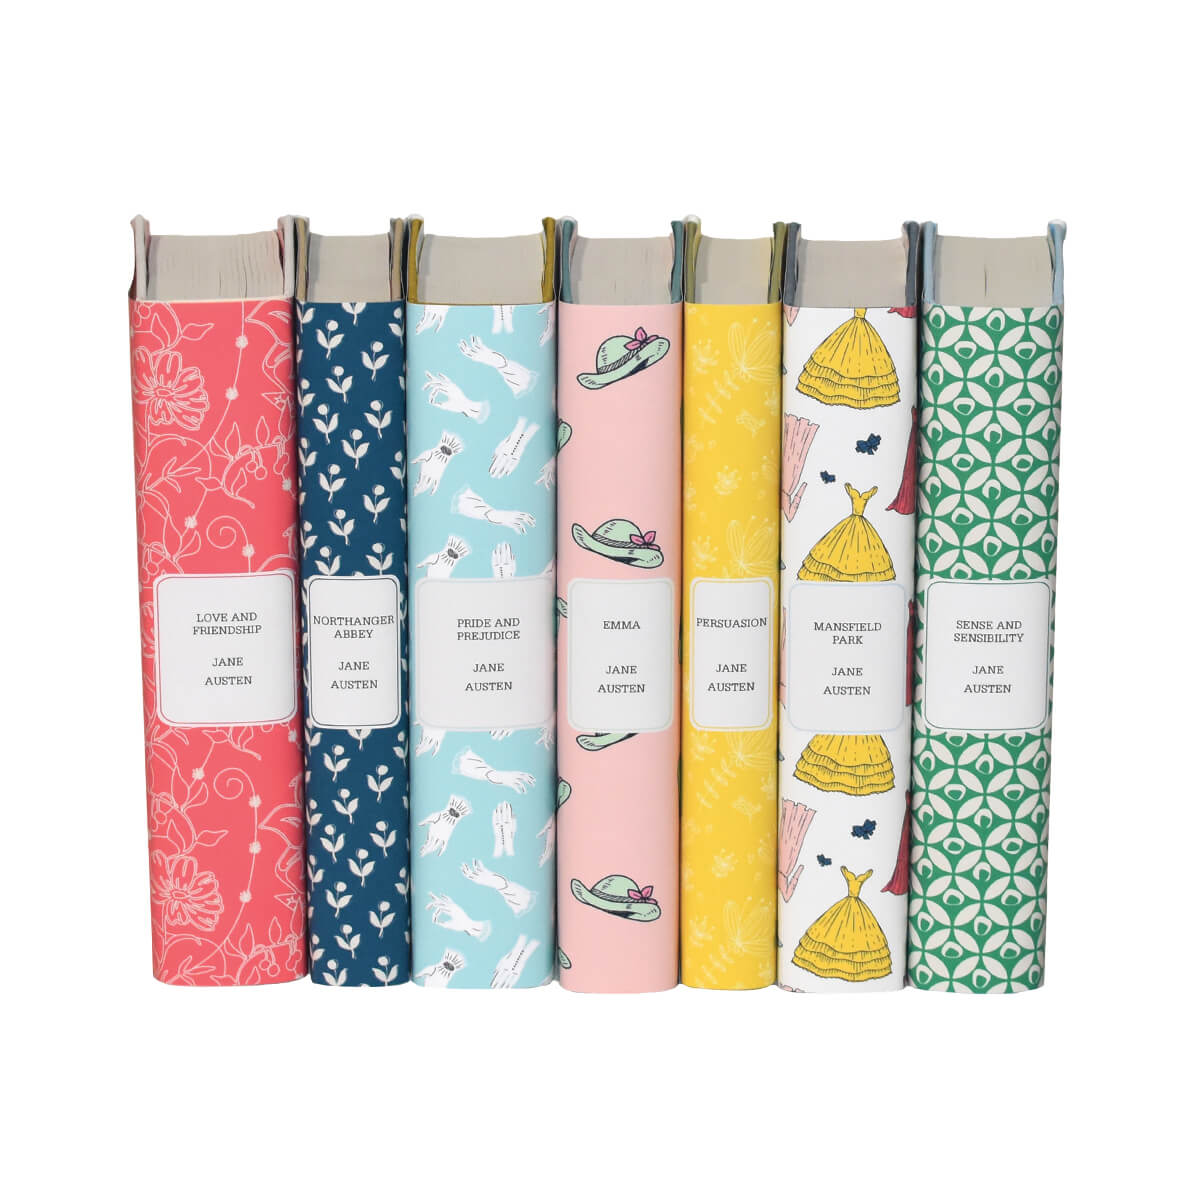 Featuring seven Penguin Classics hardcovers wrapped in charming custom-printed Juniper Books jackets, each with its own pastel pattern, this Jane Austen set offers a beautiful addition to any library or collection. 